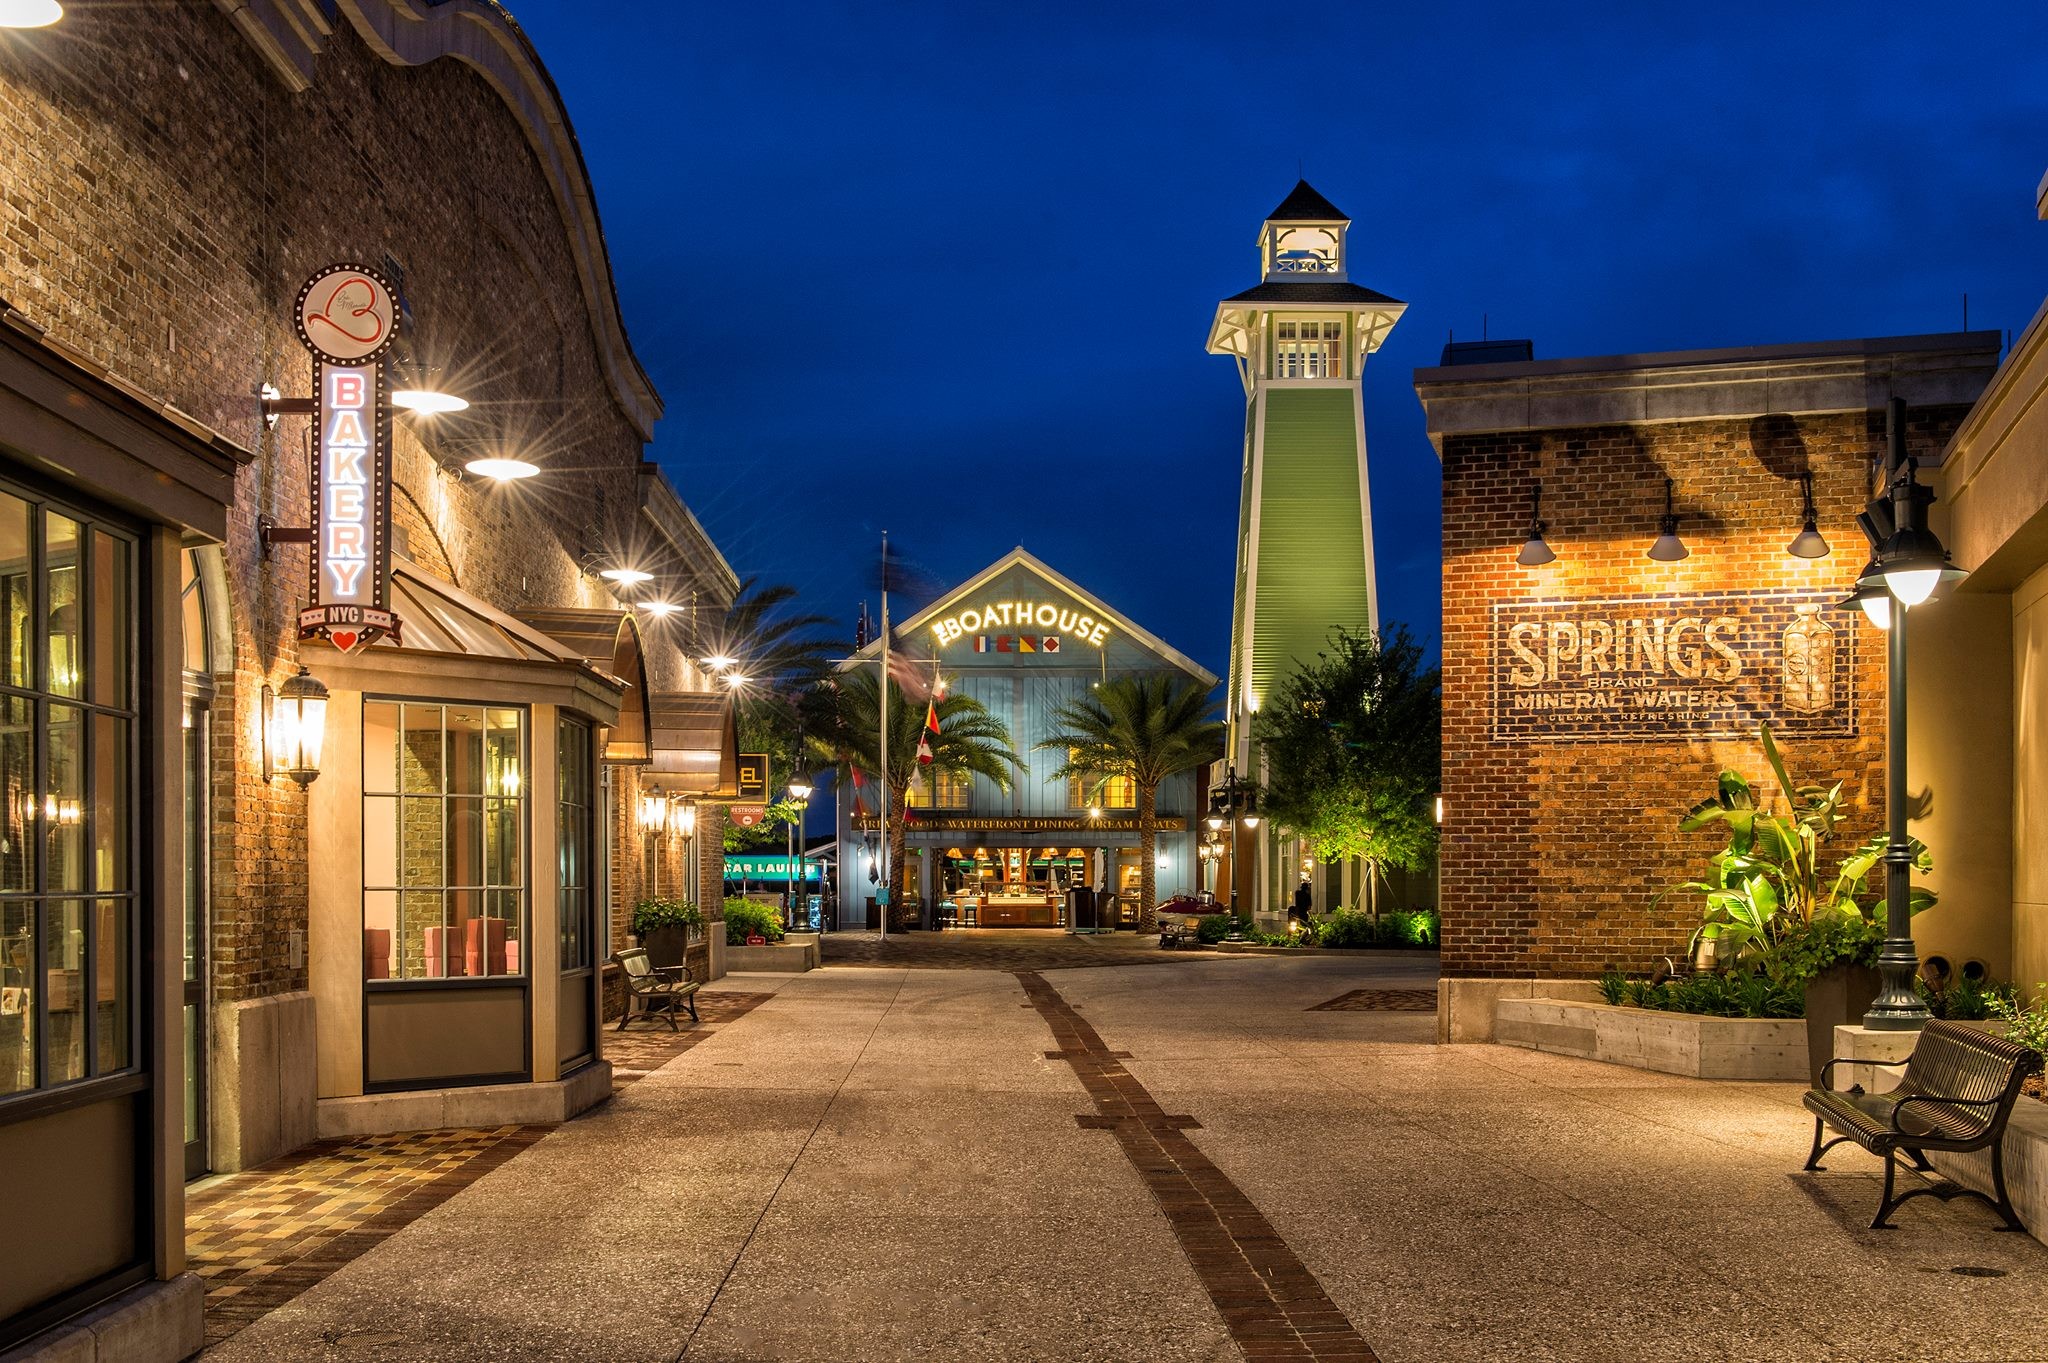 D-Living home decor store opening in Disney Springs next week | Blogs